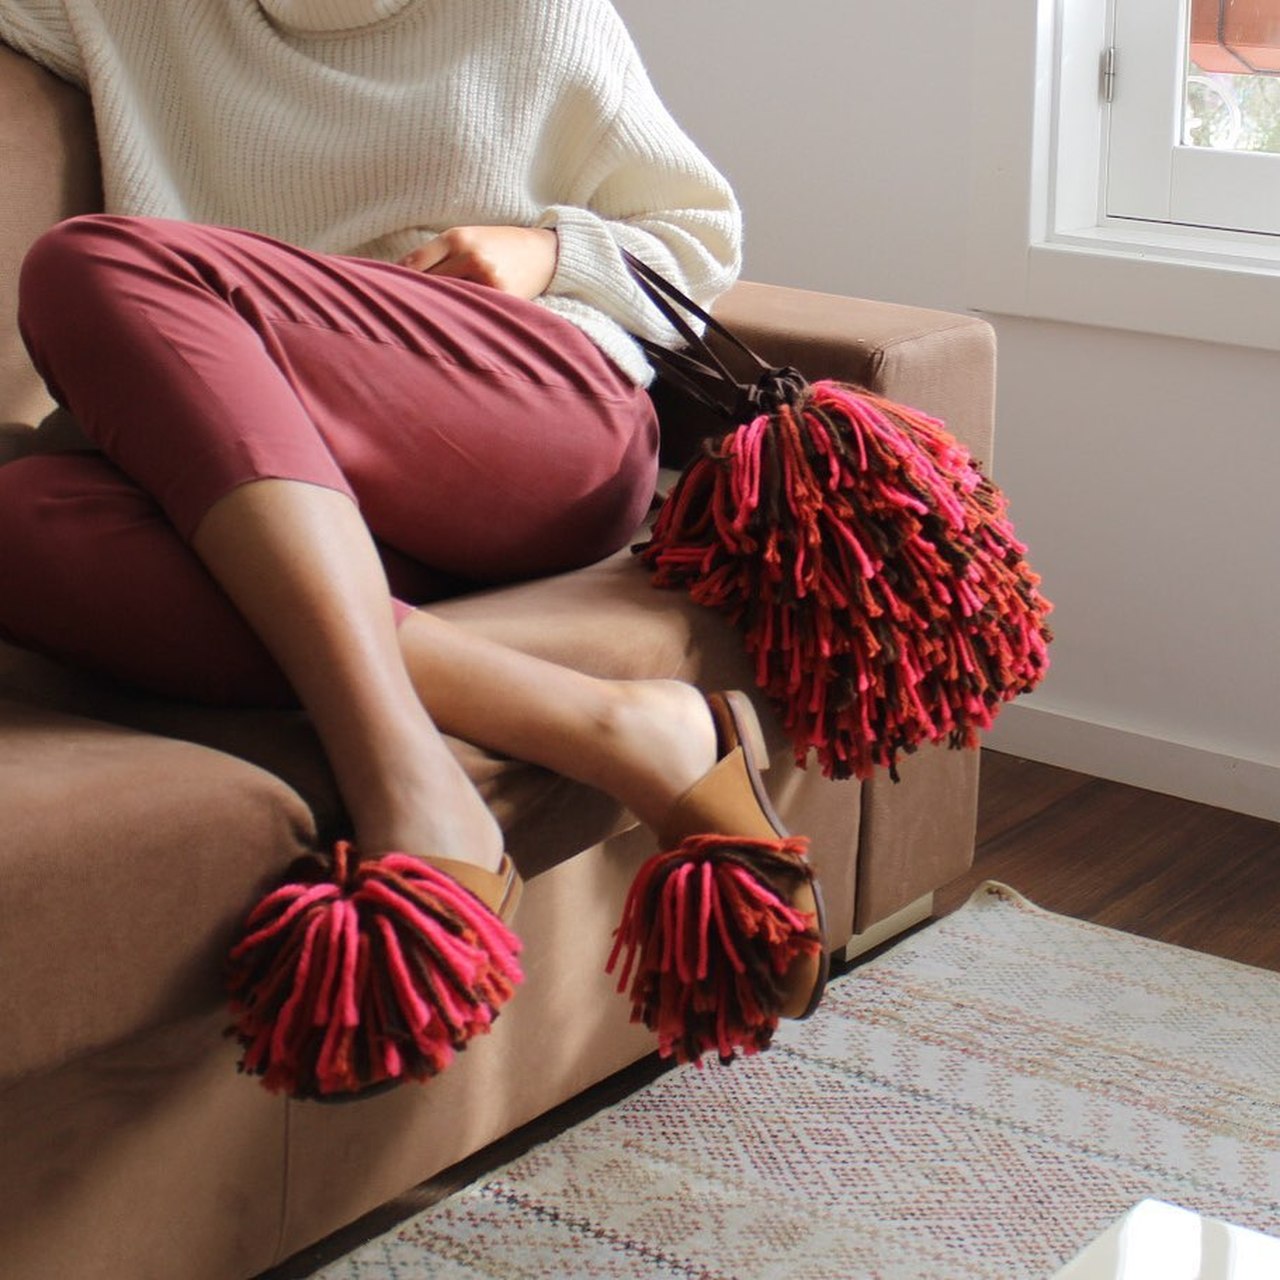 Burgas - mules with handmade wool fringes in pink